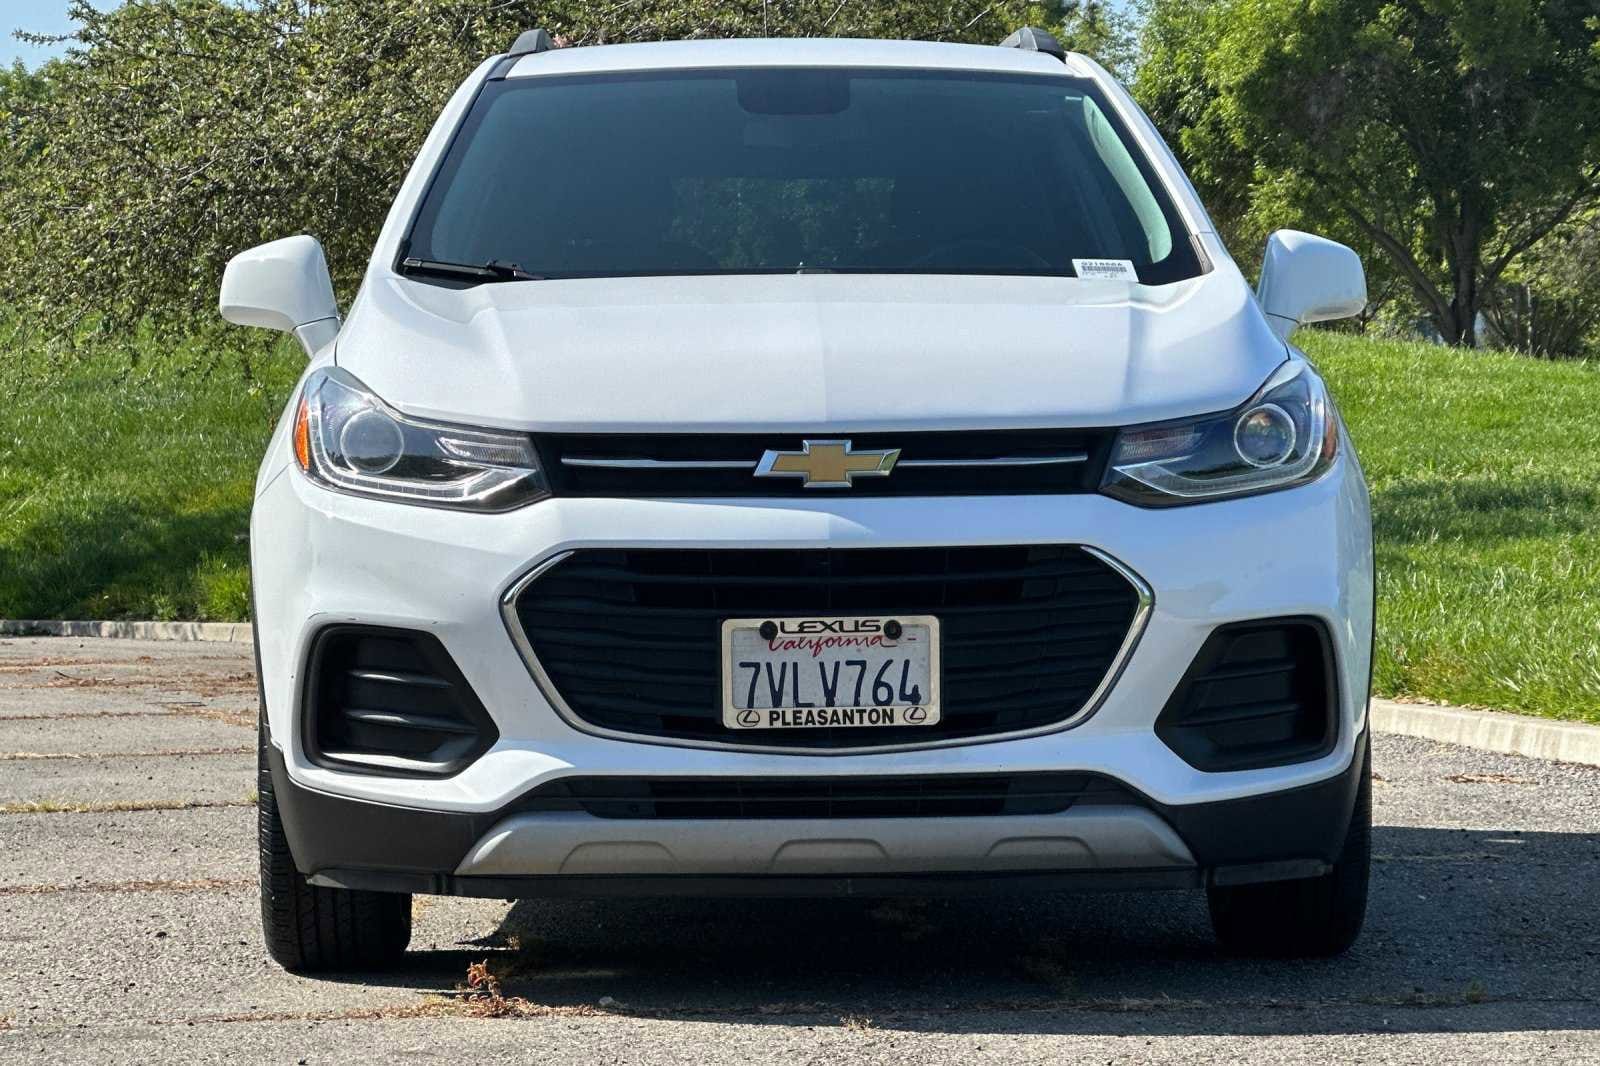 Used 2017 Chevrolet Trax LT with VIN 3GNCJLSB9HL162872 for sale in Pleasanton, CA